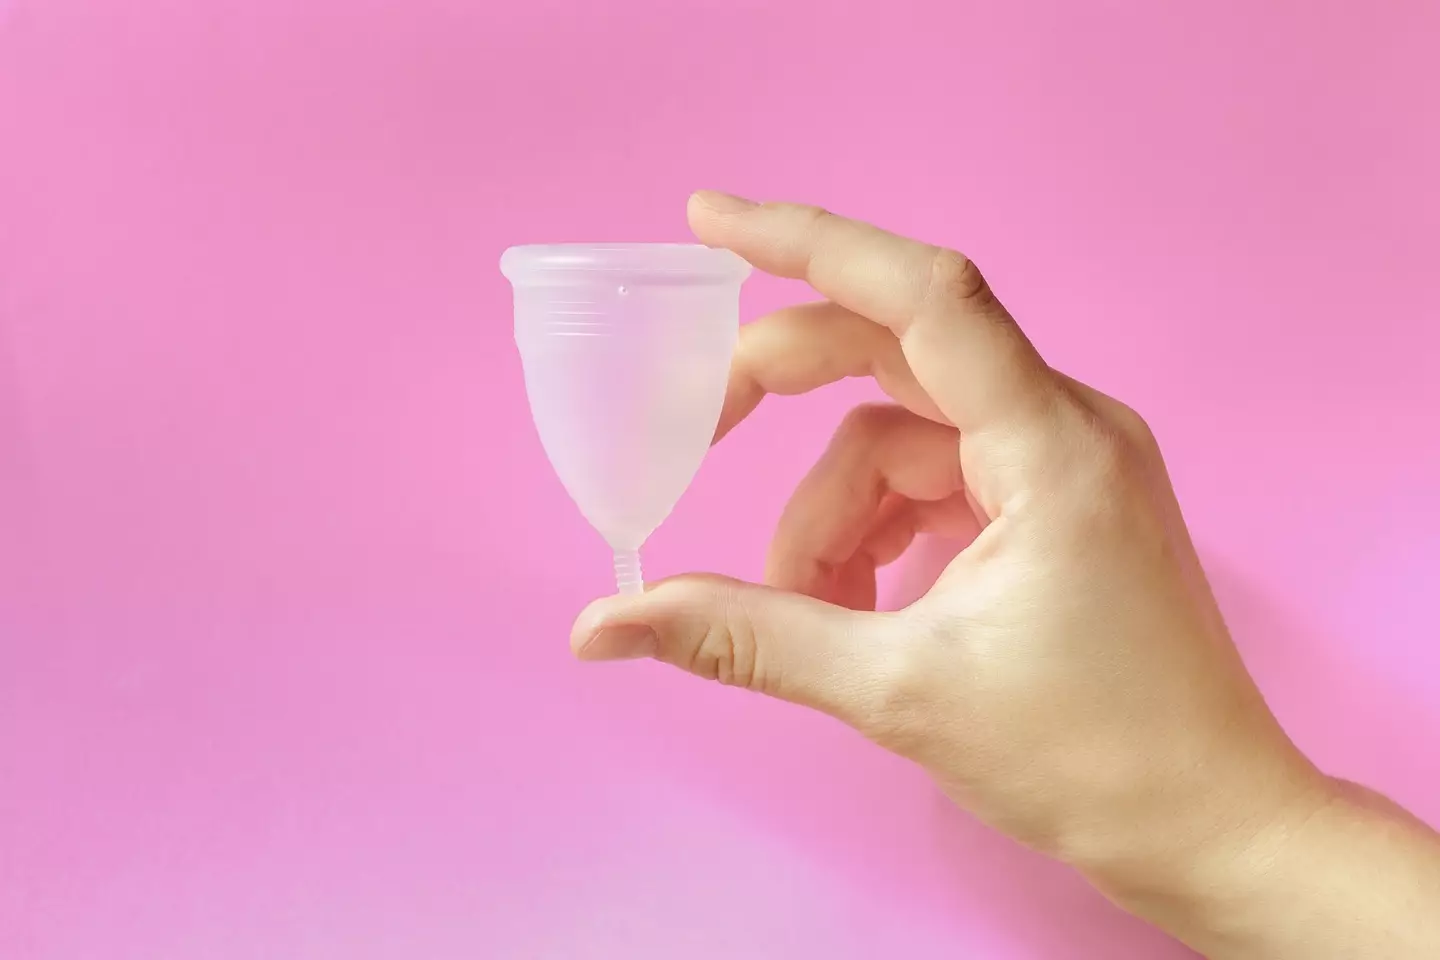 Nicole Cliffe said she 'nearly died' after her menstrual cup got stuck in her uterus 'for months'.